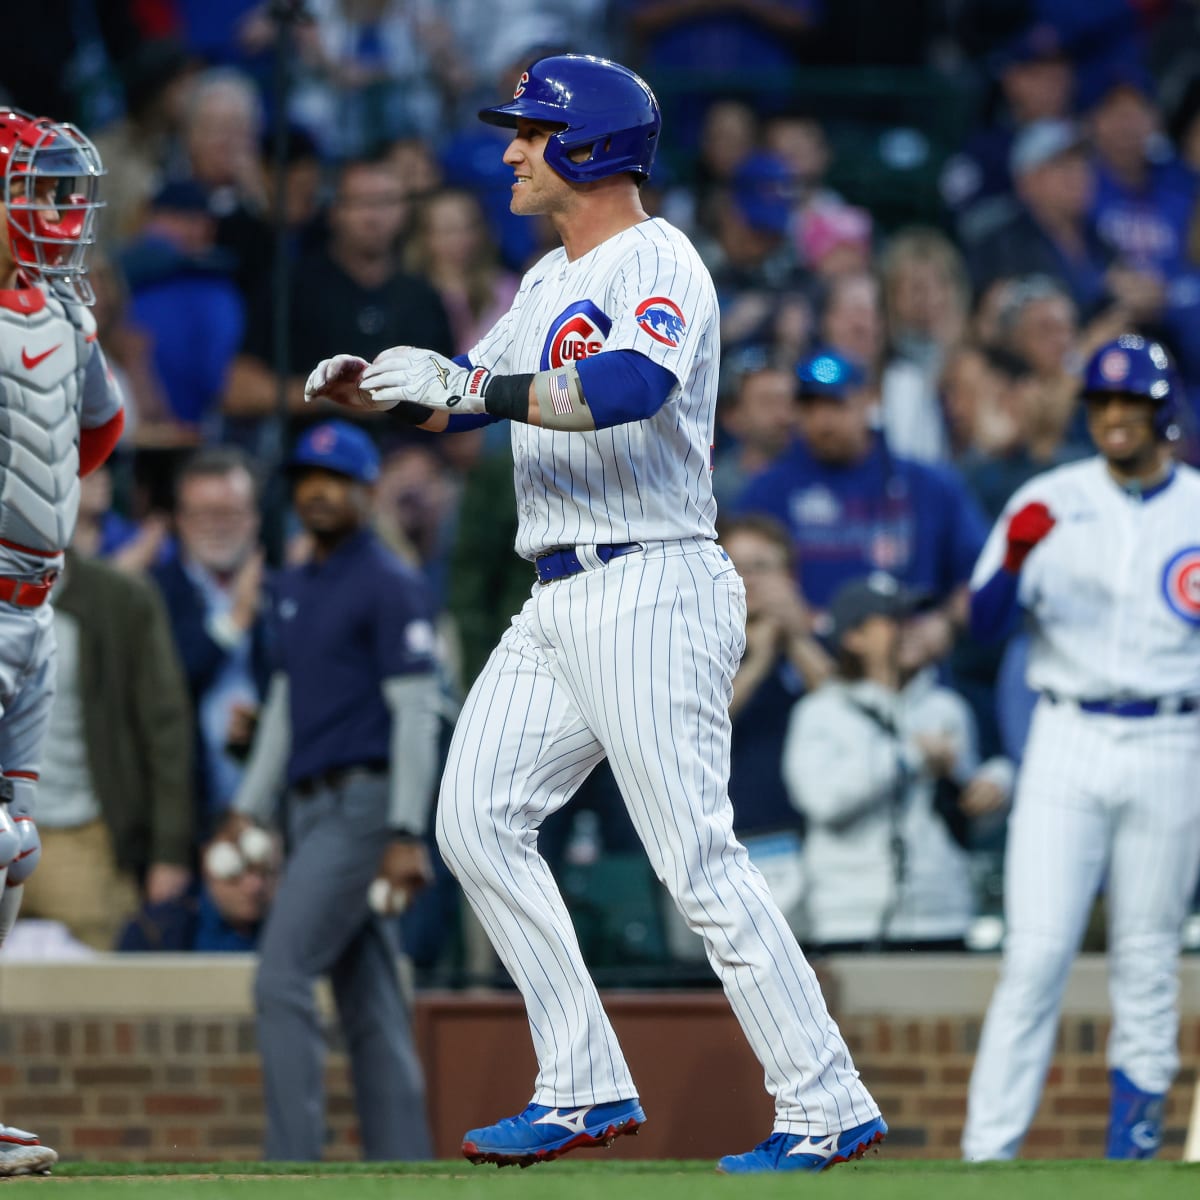 Cubs: Yan Gomes seems to be getting best out of pitching staff